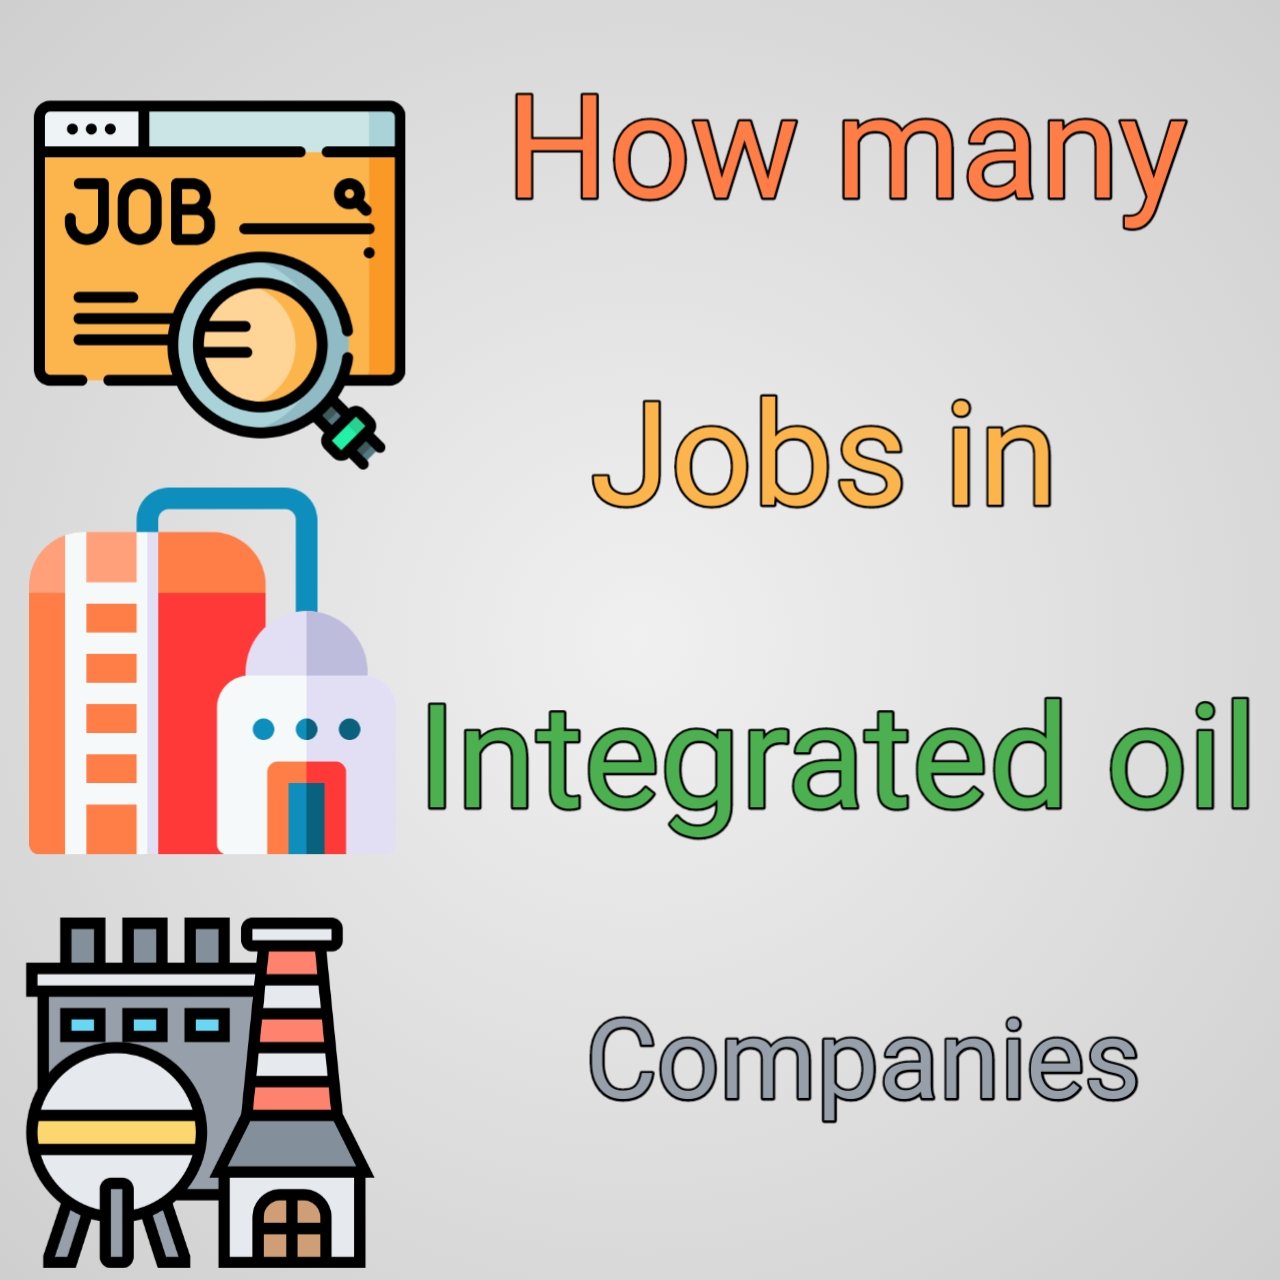 How Many Jobs Are Available In Integrated Oil Companies